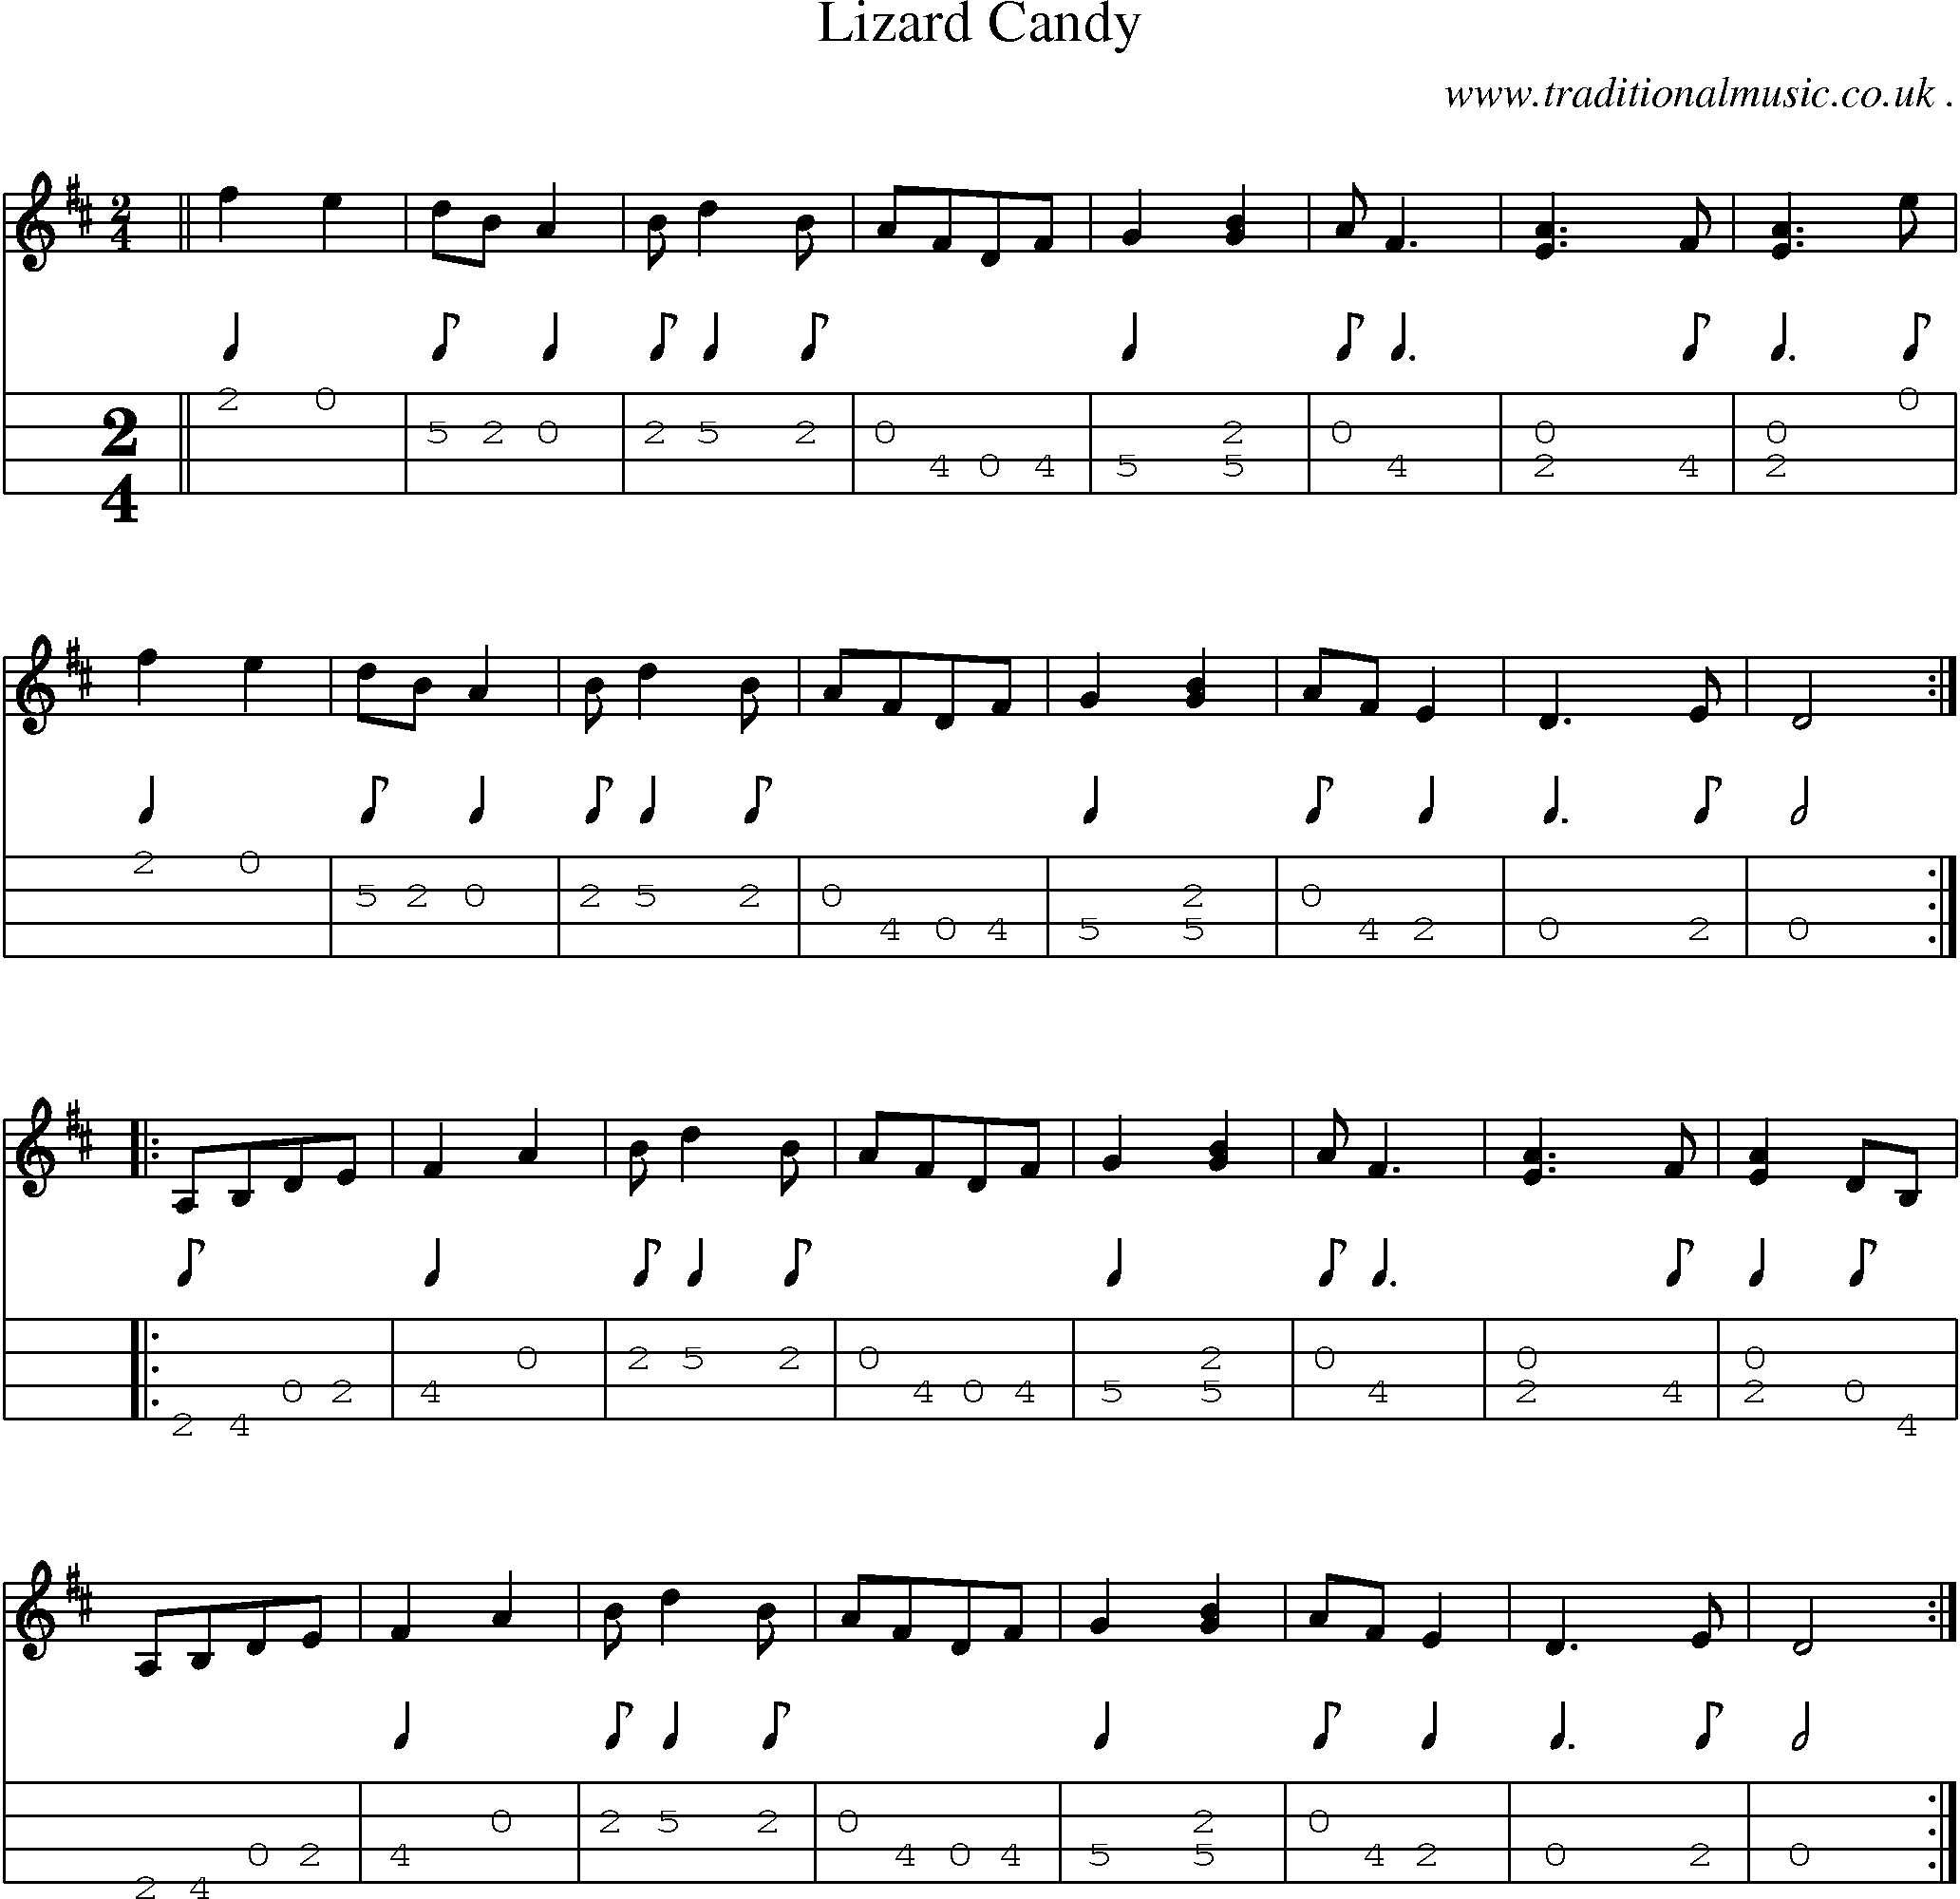 Music Score and Guitar Tabs for Lizard Candy